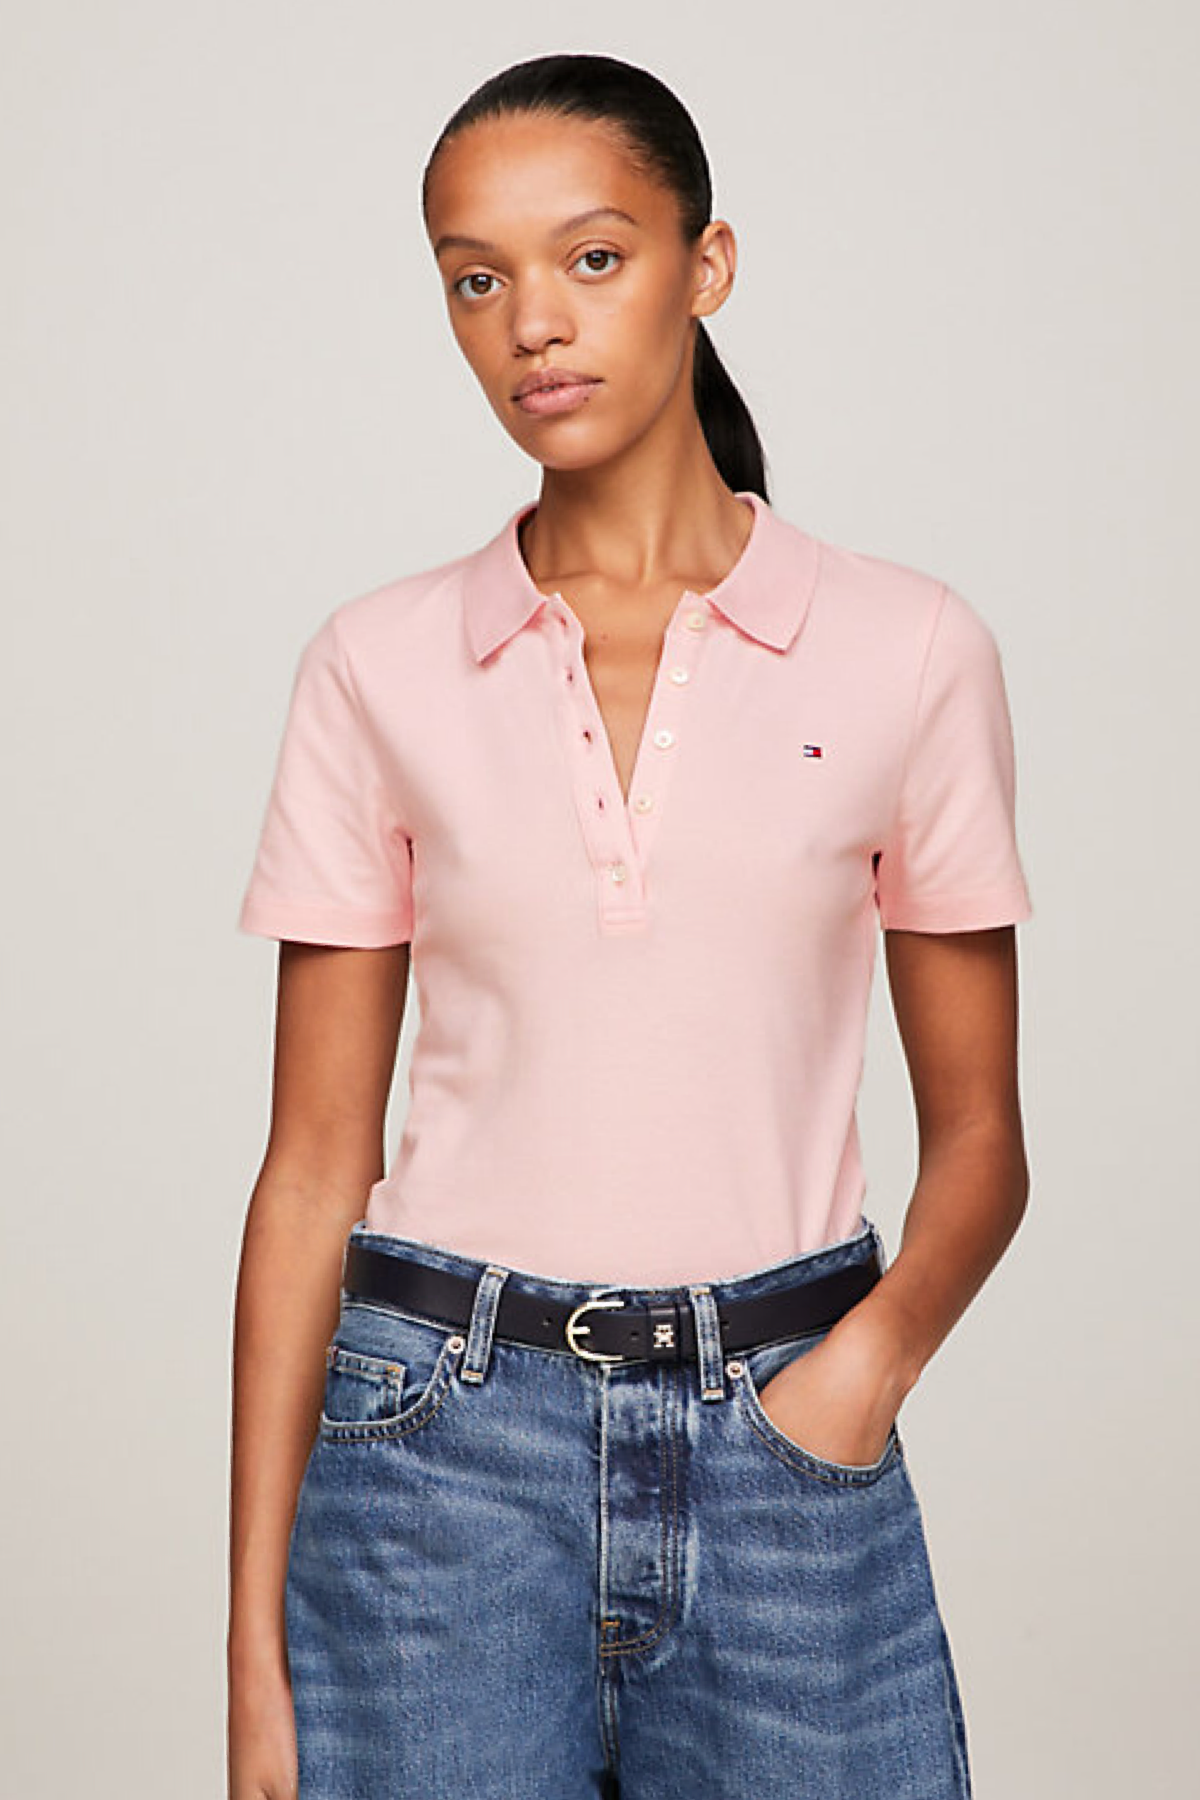 Tommy Hilfiger polo 1985 collection slim fit pink